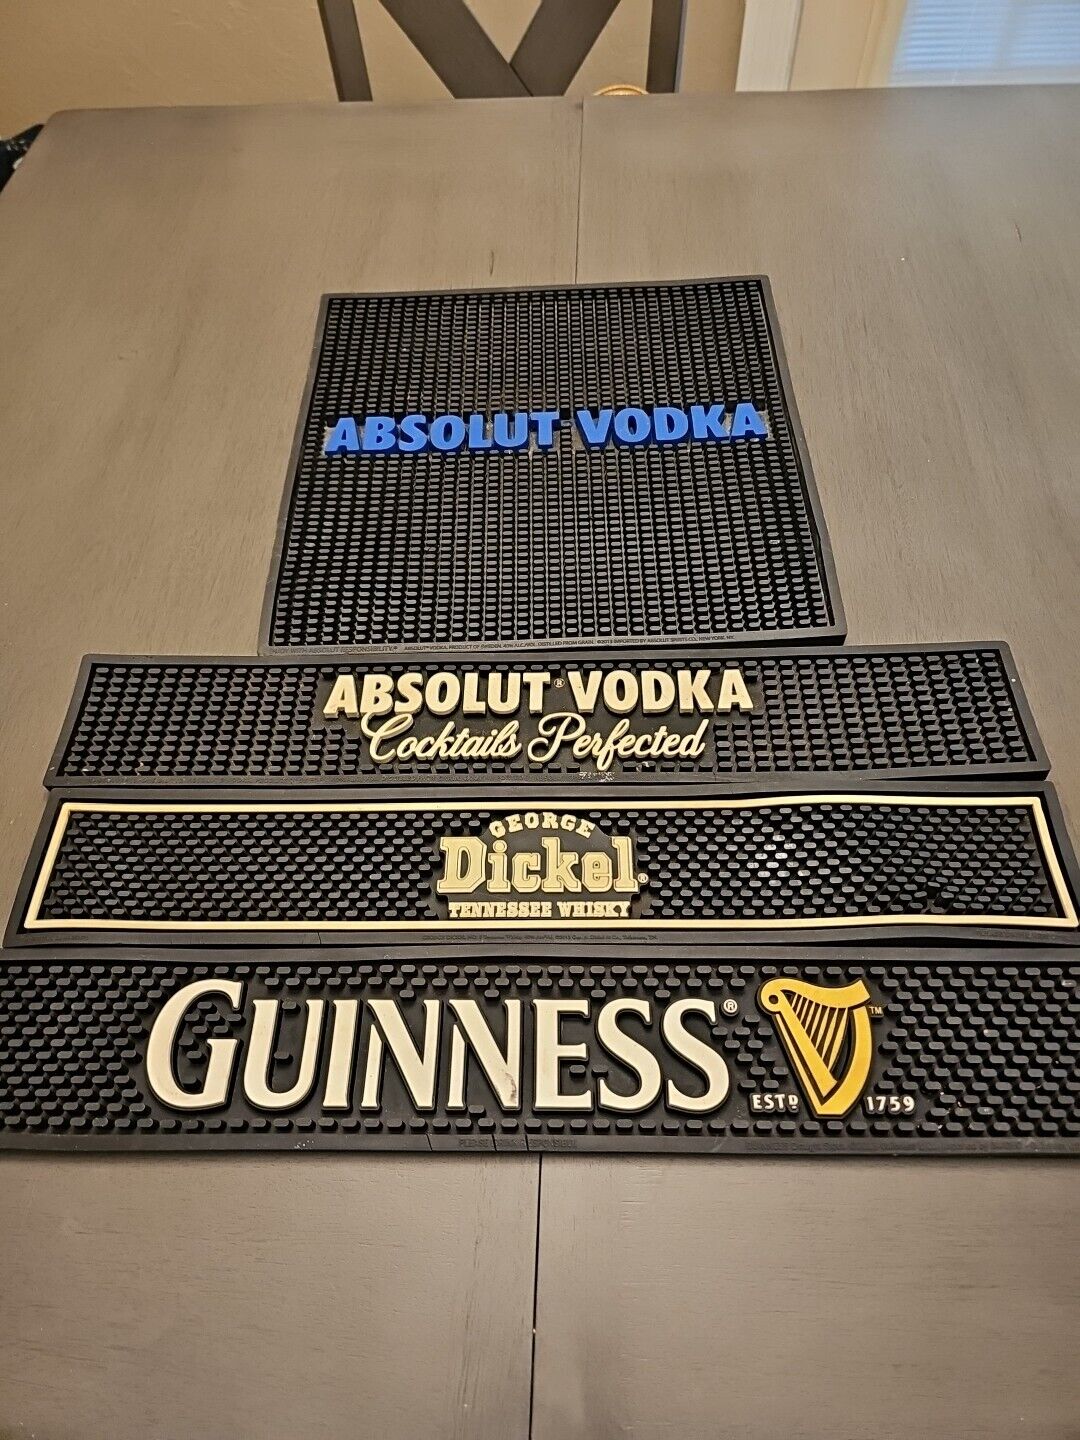 Absolut Vodka Guiness George Dickel Tennessee Whiskey Bar Mats Set Of 4